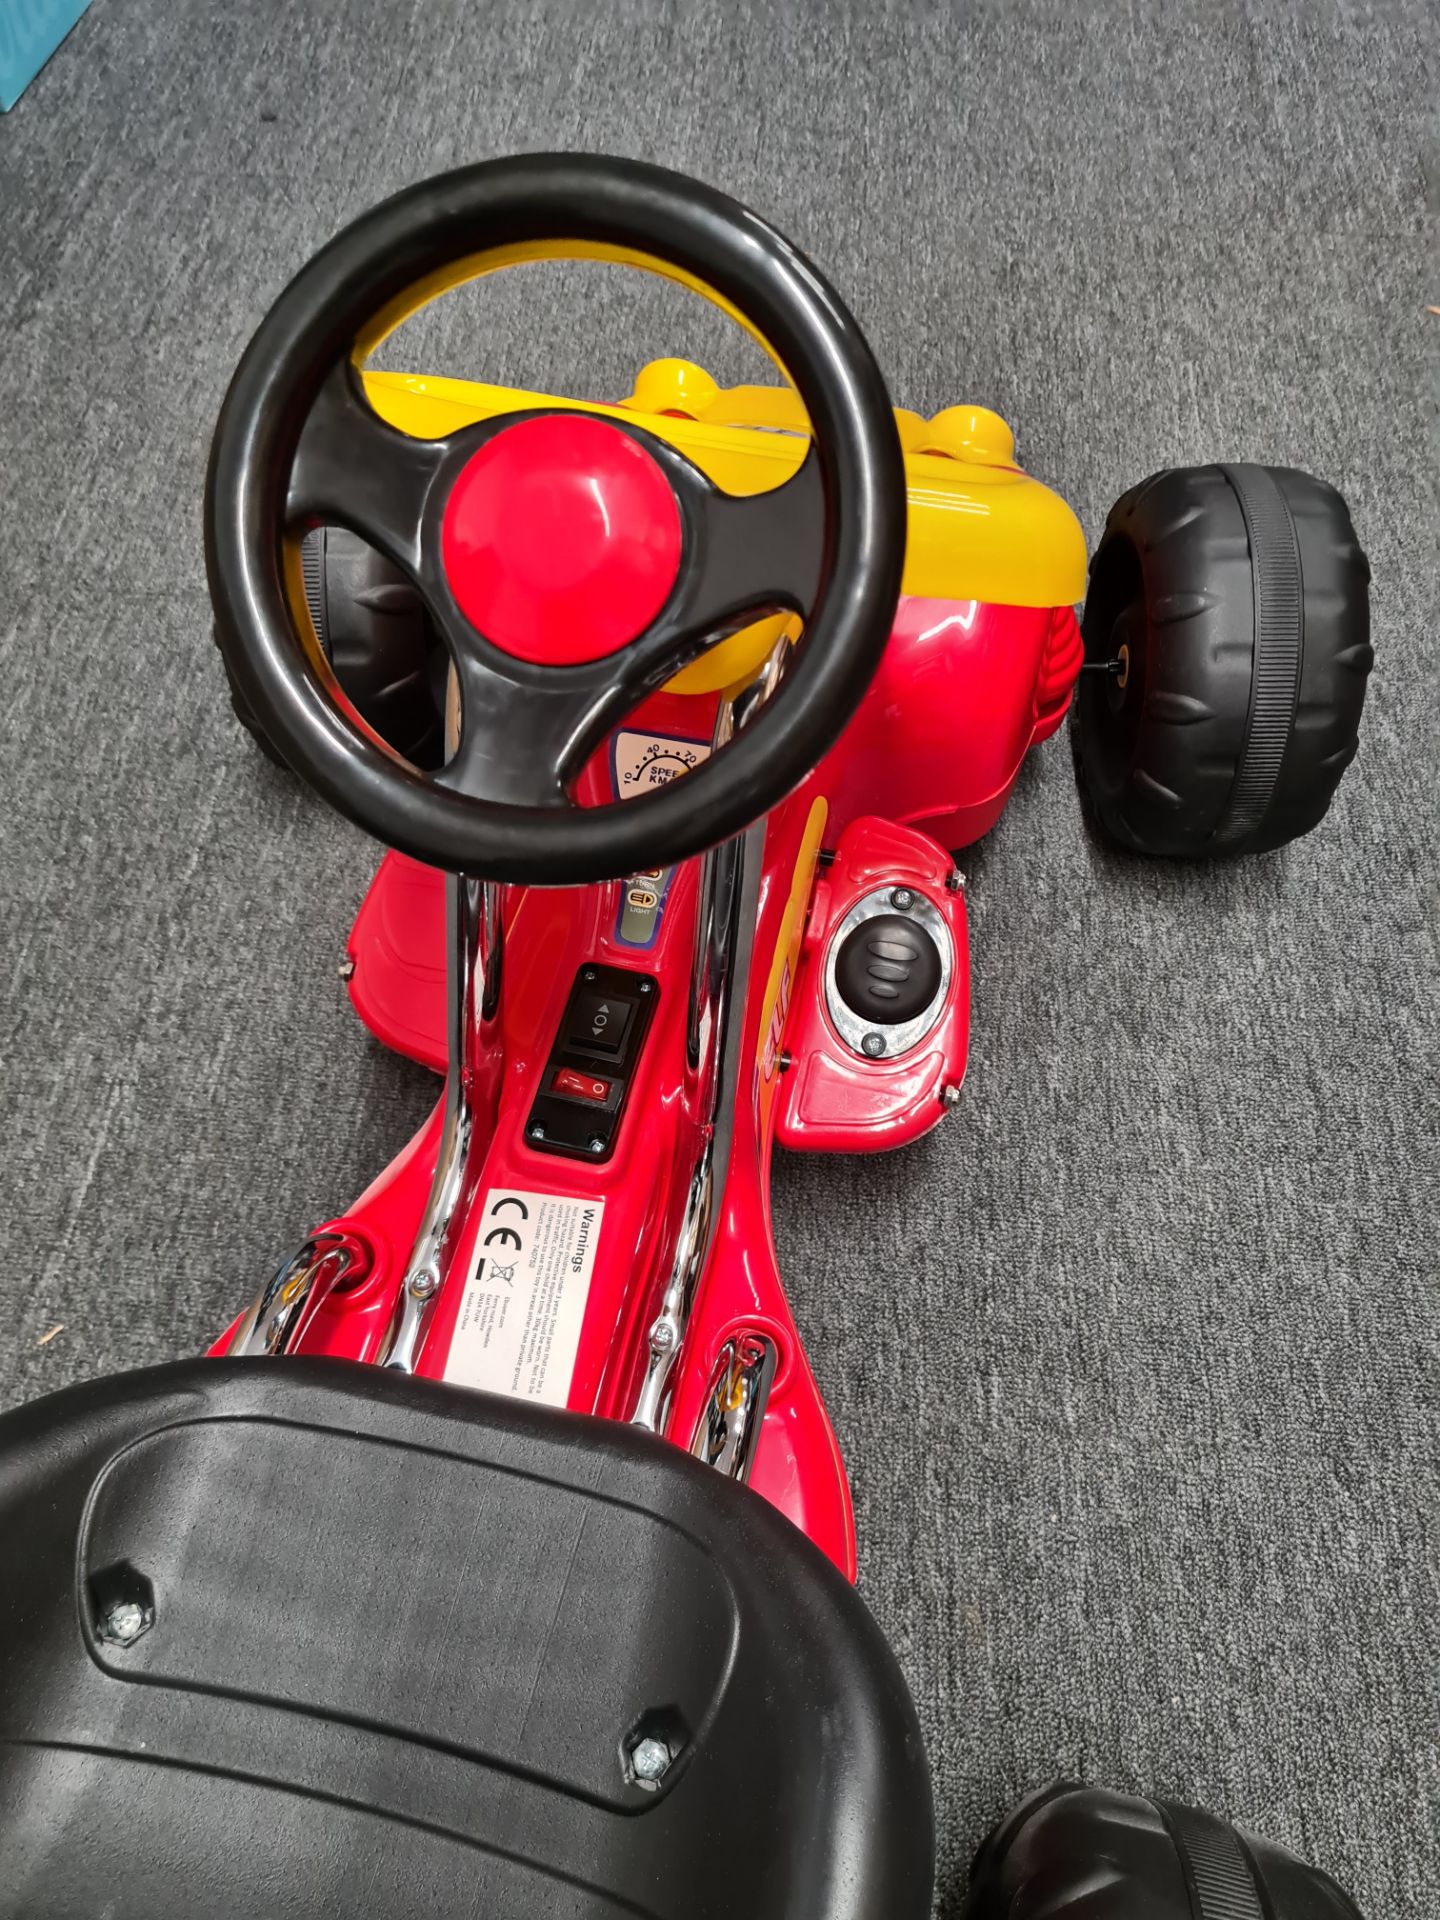 15 X ELECTRIC 6V RIDE ON GO KART - RED / YELLOW £2250- BRAND NEW FOR KIDS - Image 3 of 10